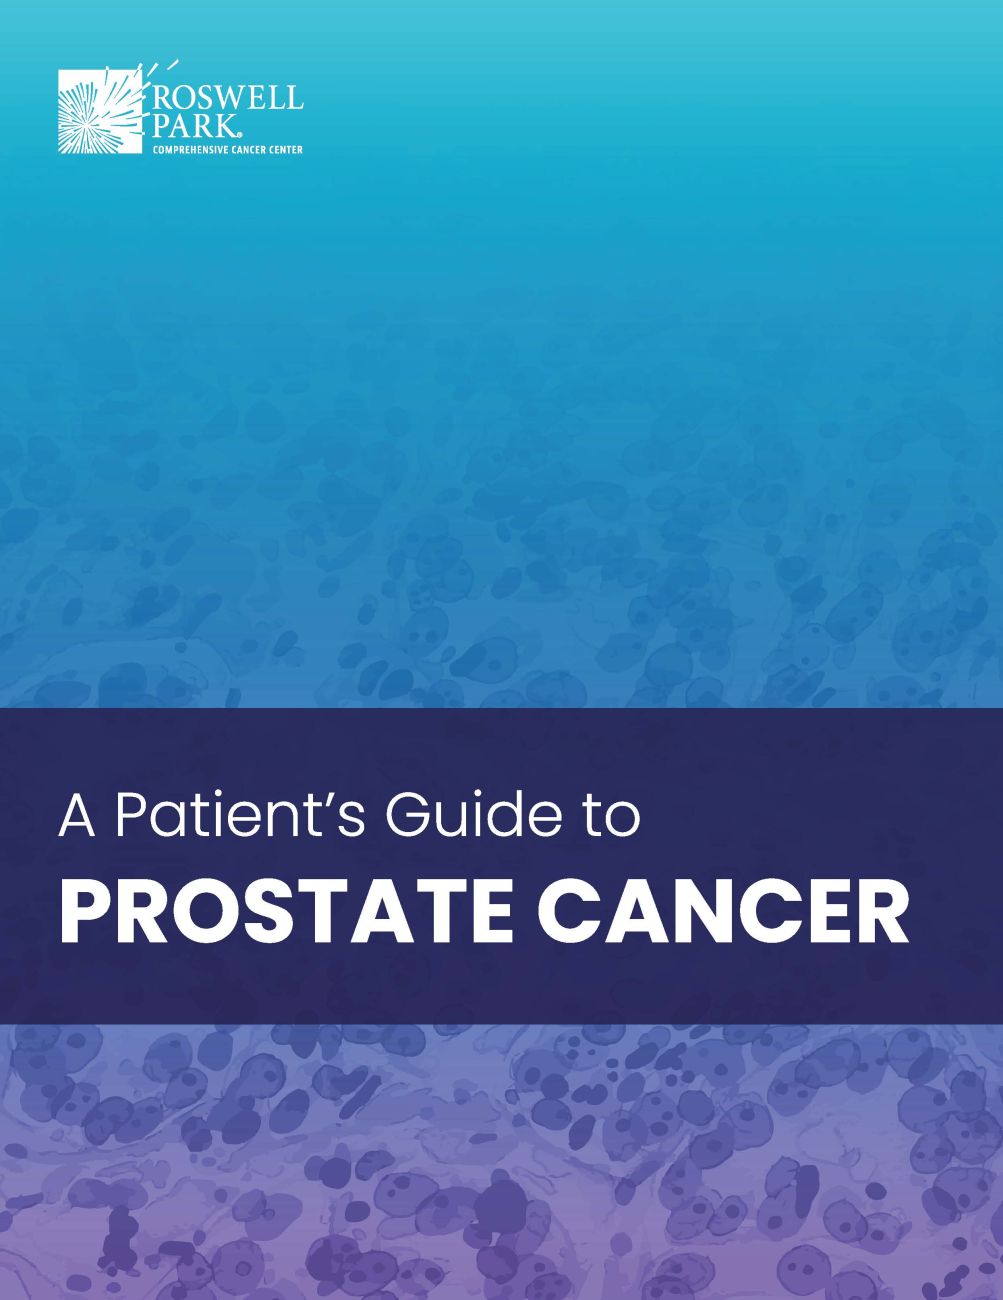 A Patient's Guide to Prostate Cancer book cover by Dr. Khurshid Guru